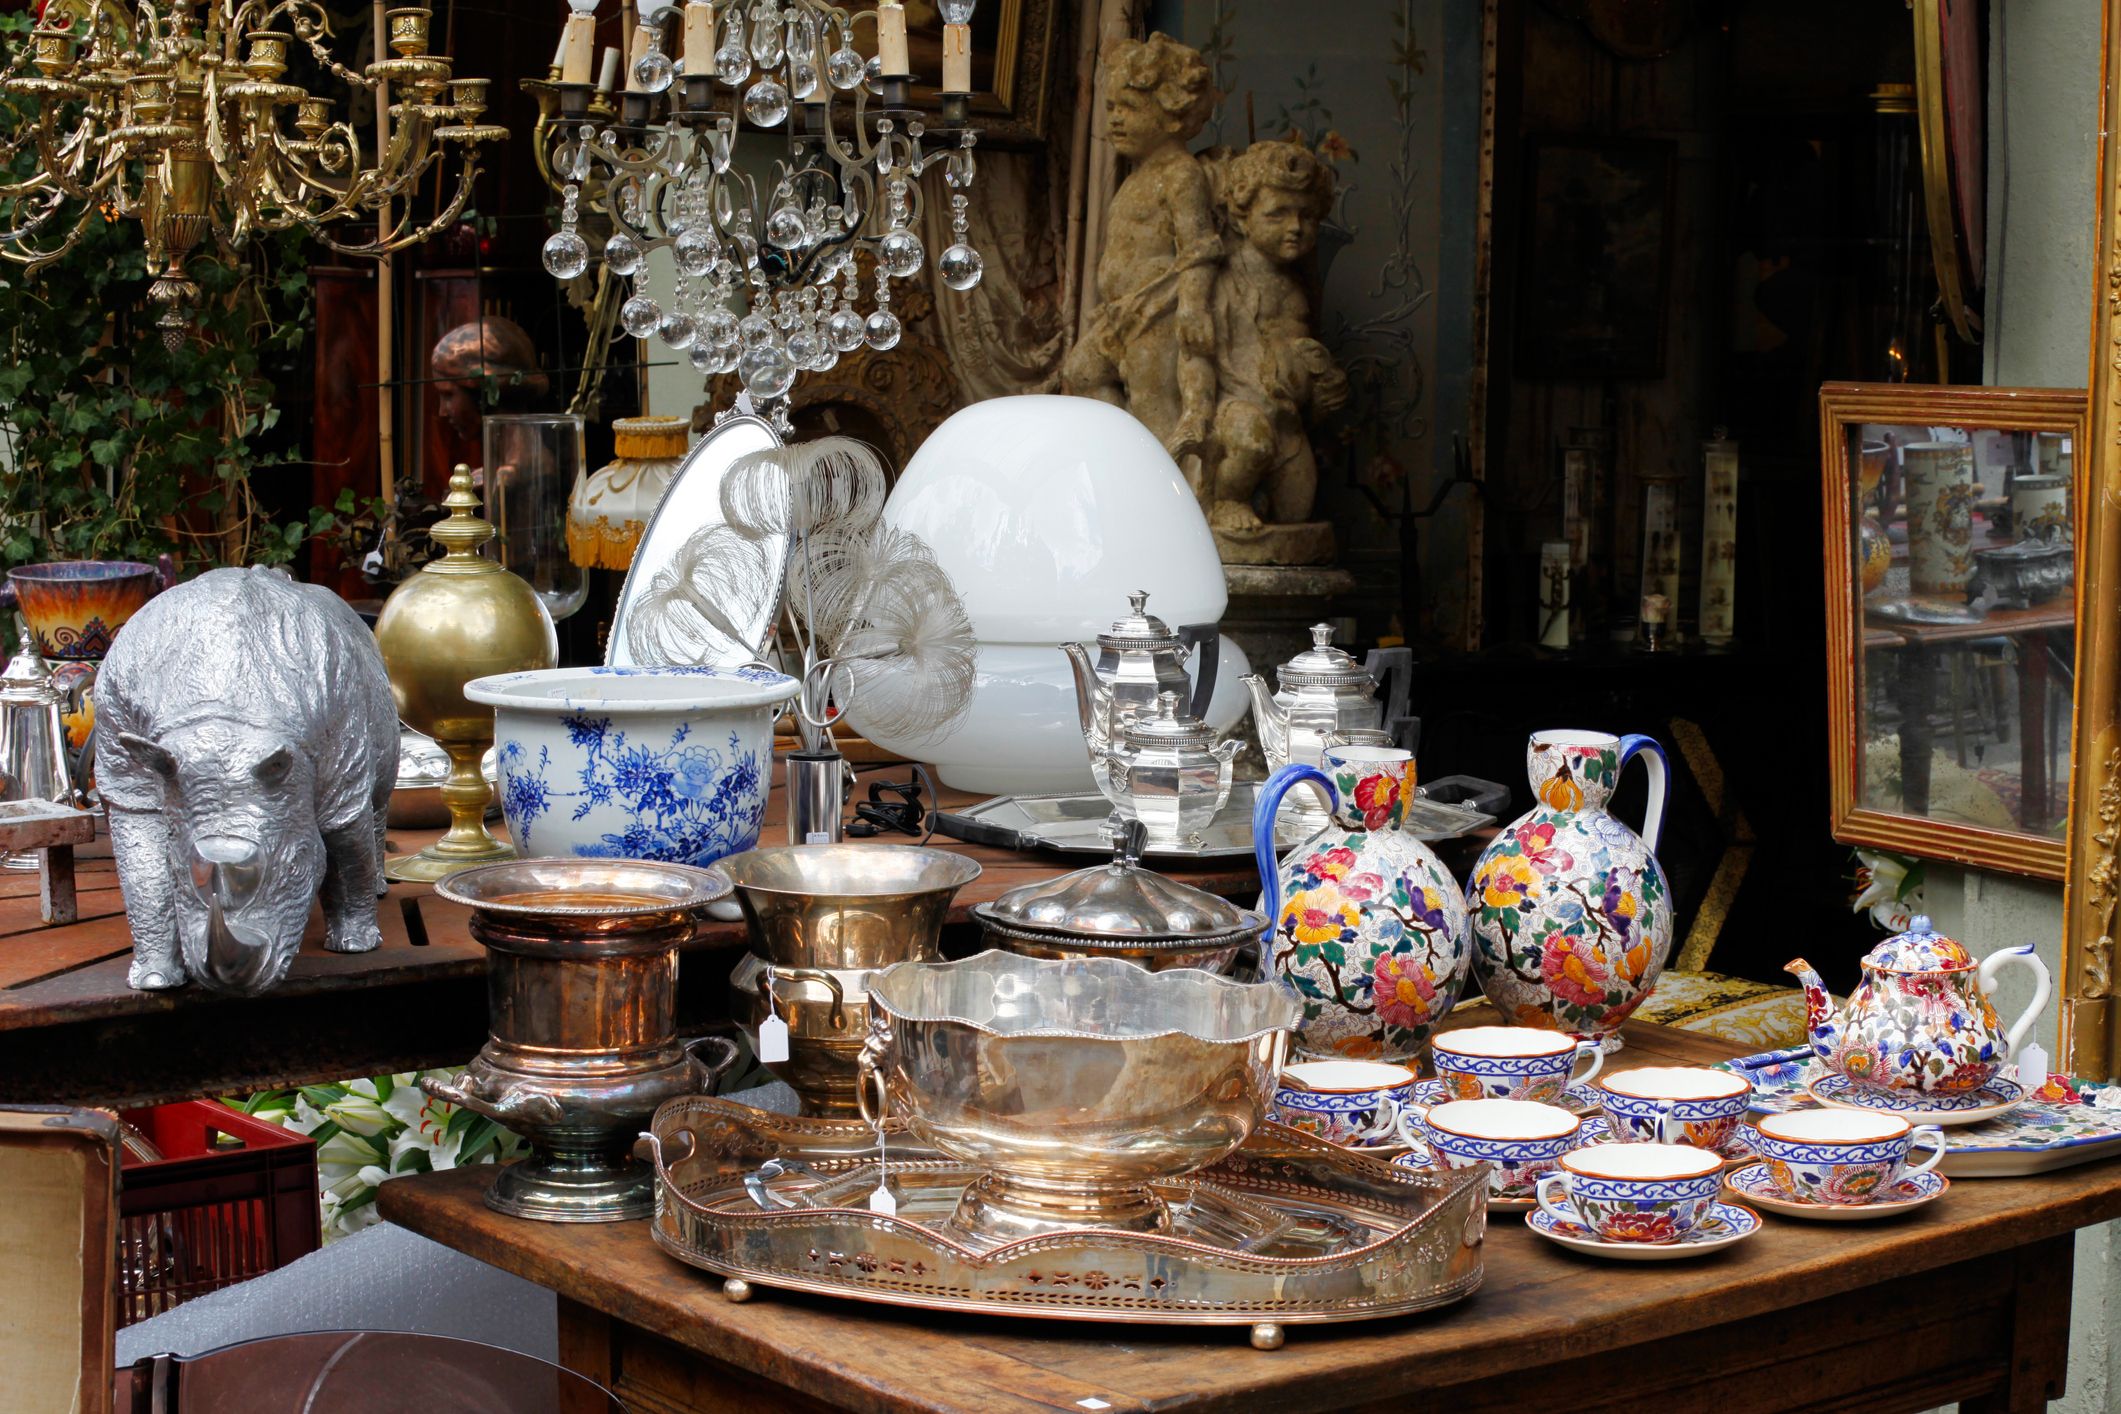 How to Score Insane Deals at Any Estate Sale, According to Pros